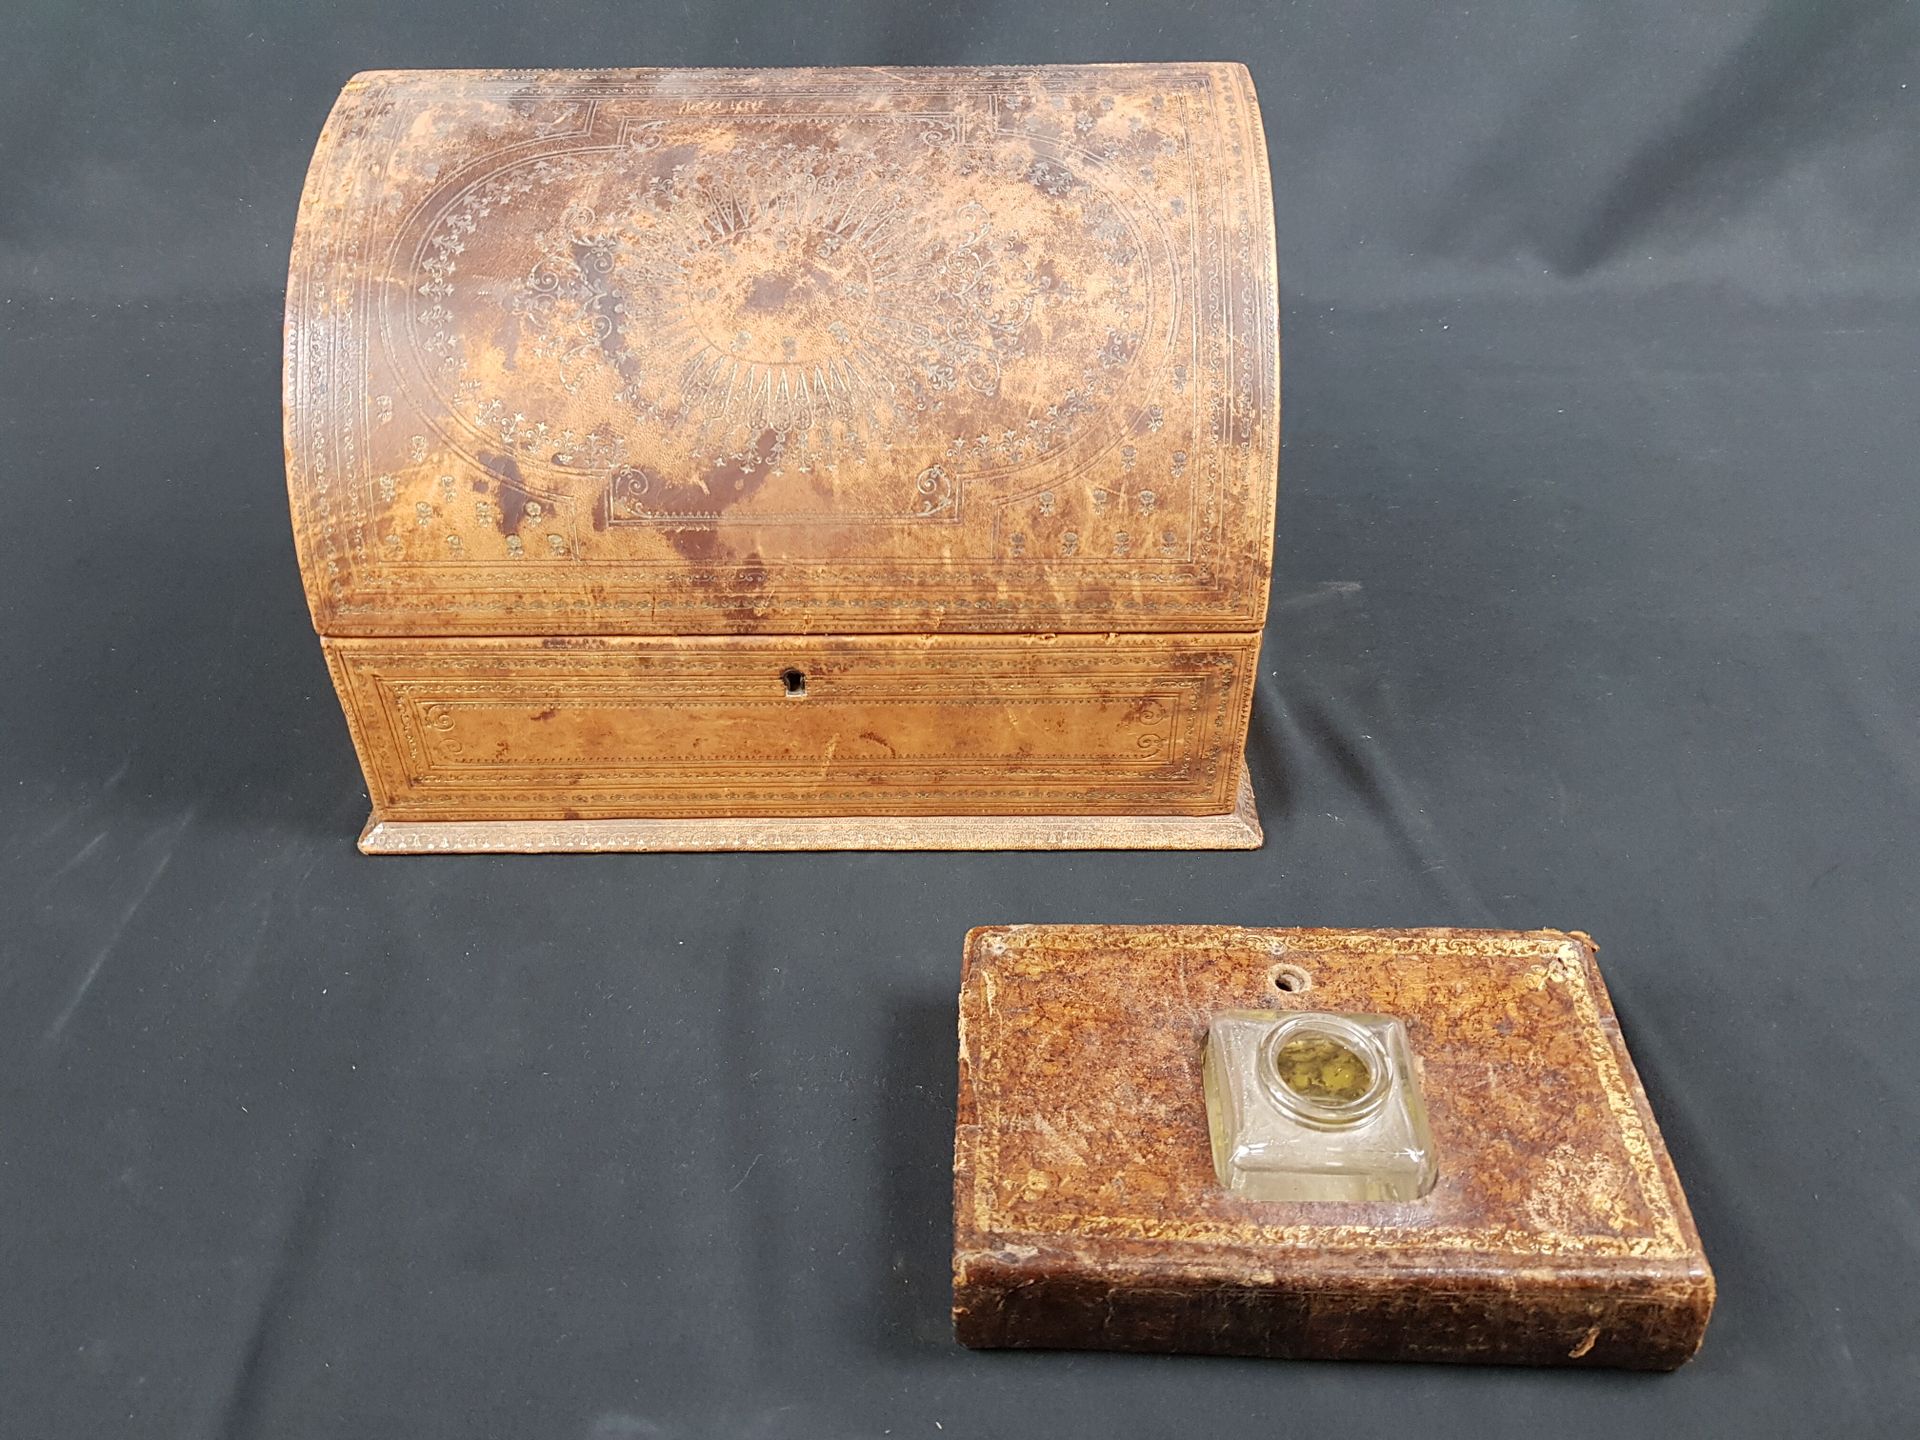 Null LOT including a leather mail folder and an inkwell - wear and tear